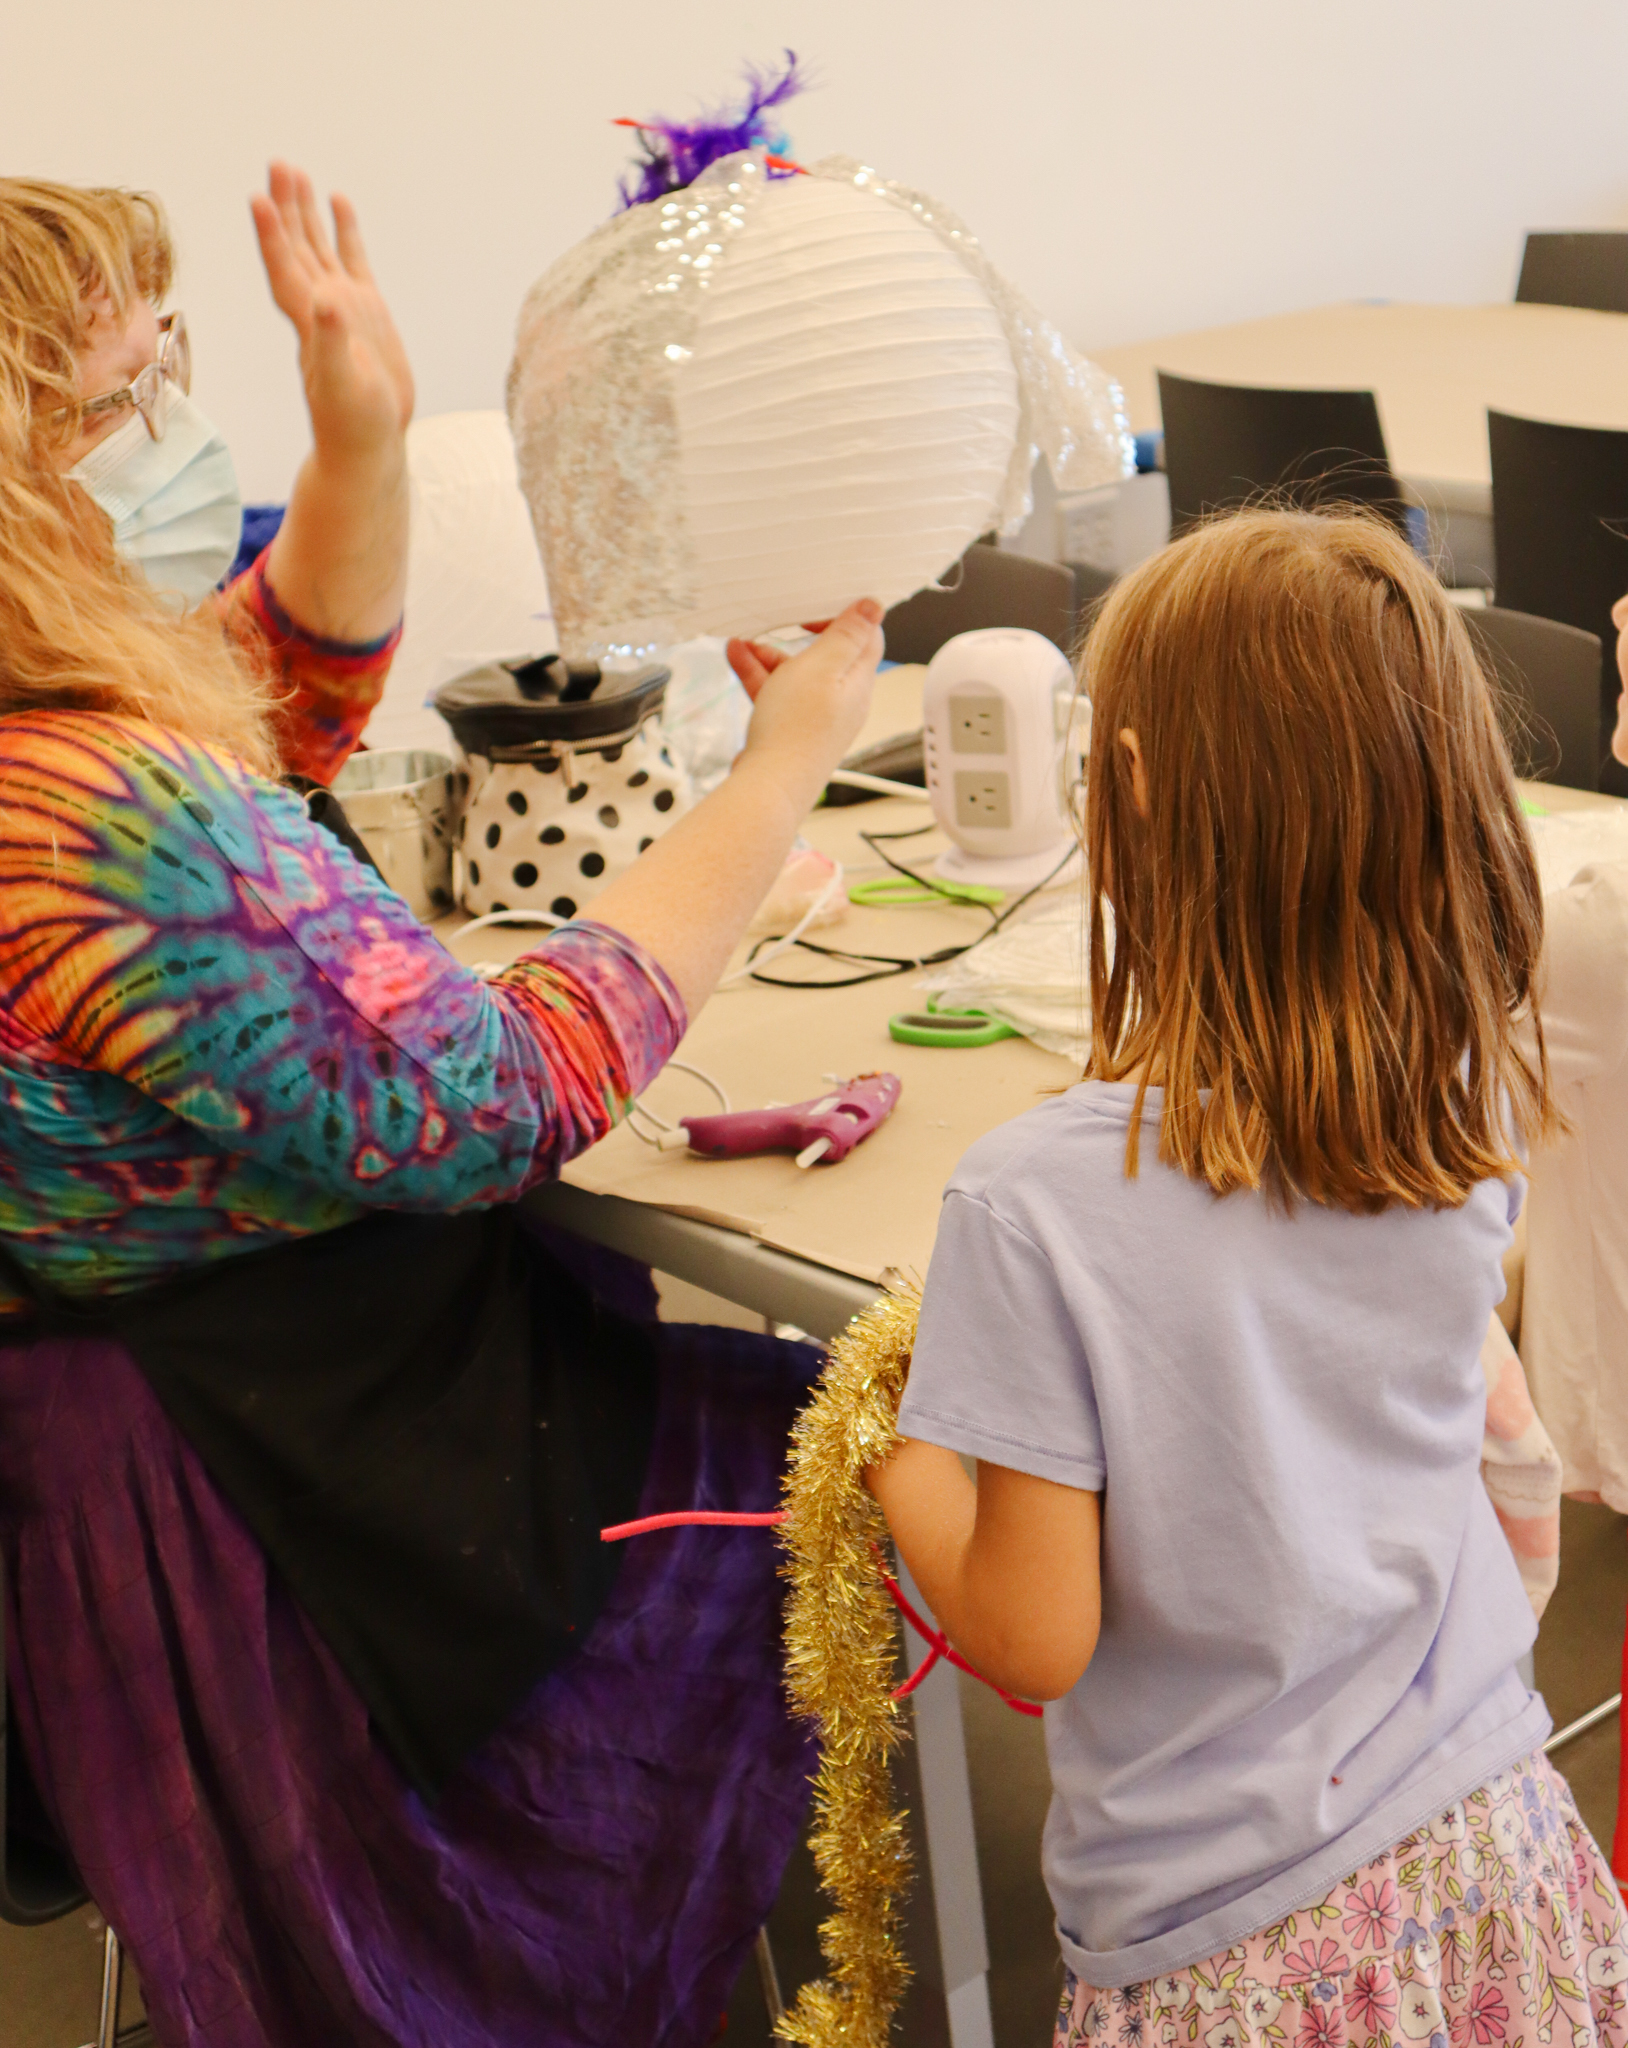 A person in a tie-dyed shirt and purple skirt holds up a circle lantern with purple feathers and a sparkly cape. A little kid in a purple shirt and floral skirt stands in front.